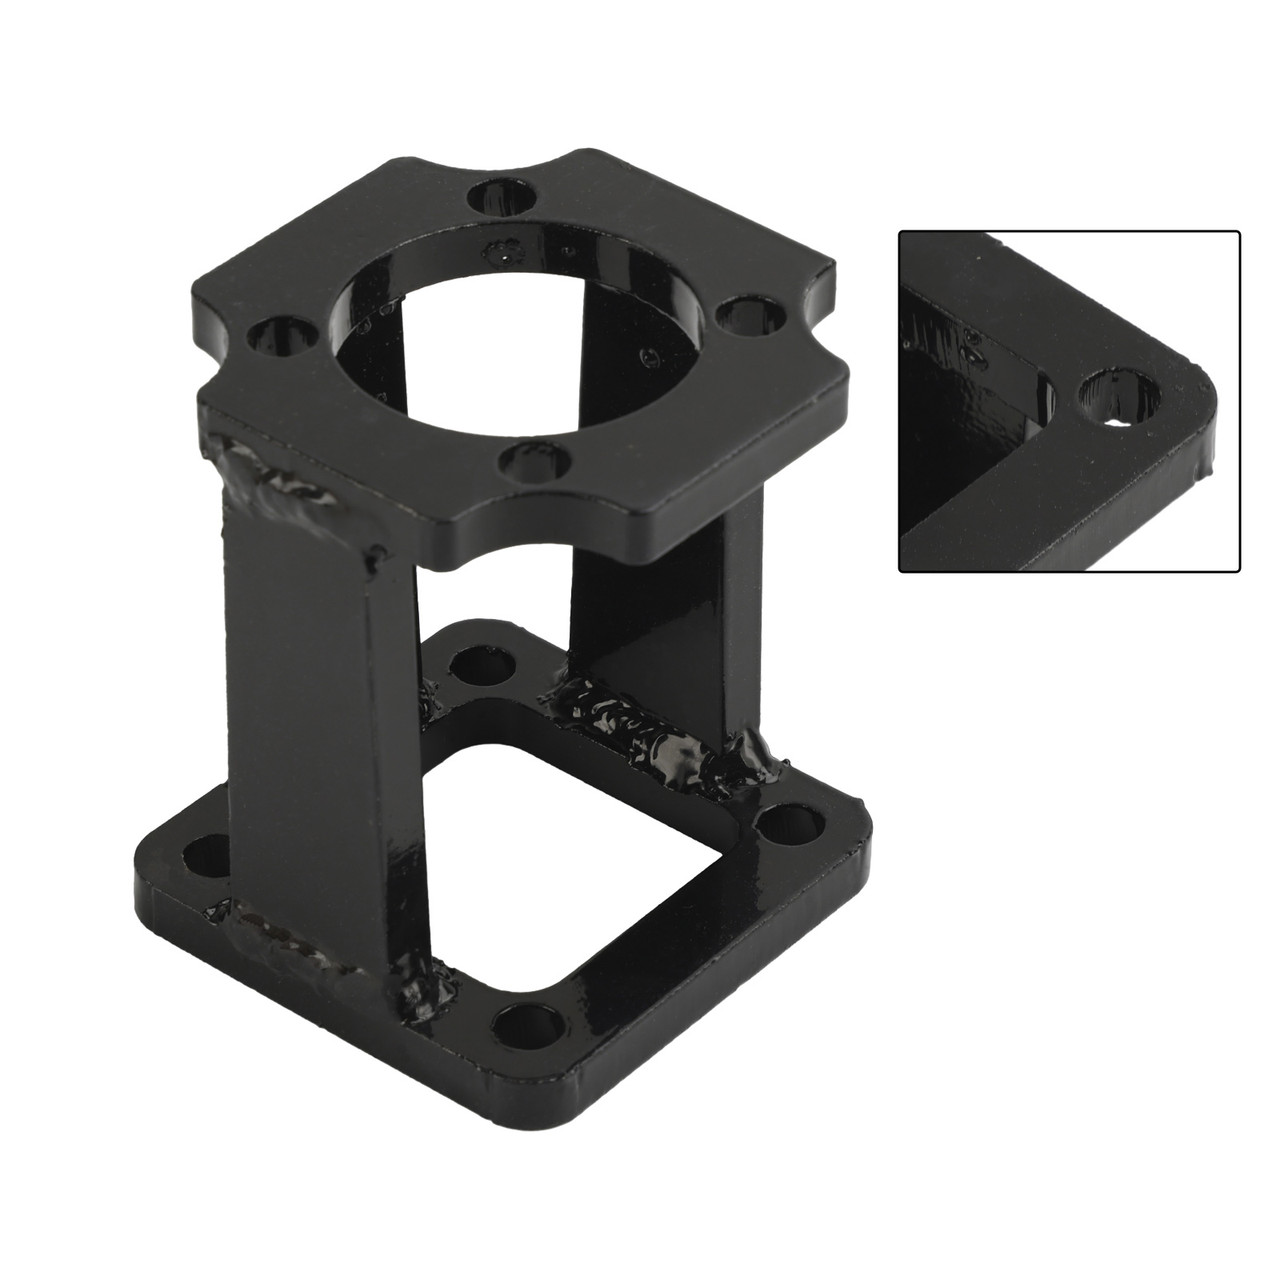 Log Splitter Hydraulic Pump Mount Fits For 5-7 Hp Engines